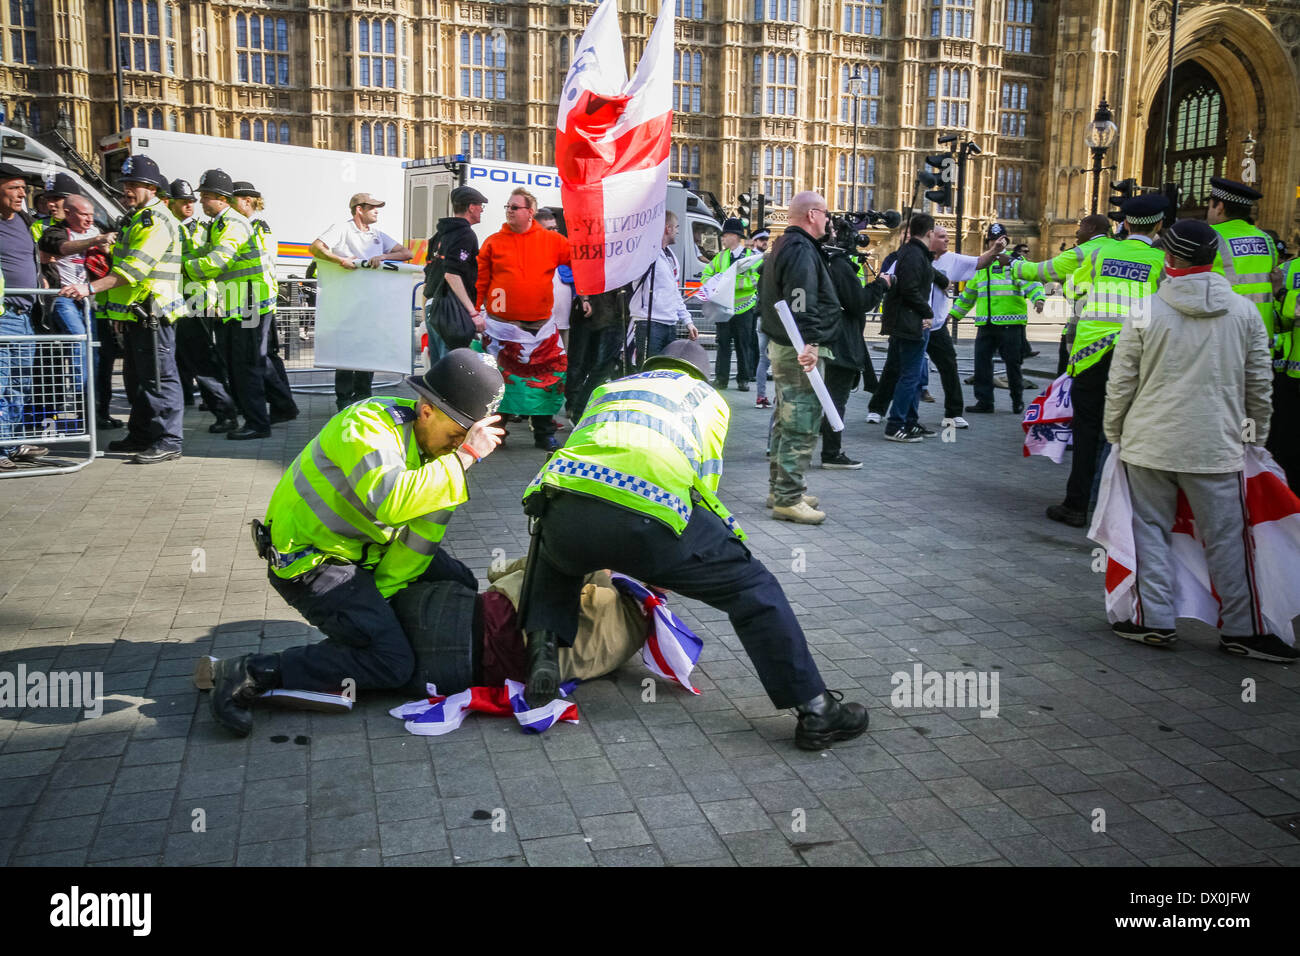 Clashes and arrests during EVF (English Volunteer Forces) protest march in London Stock Photo